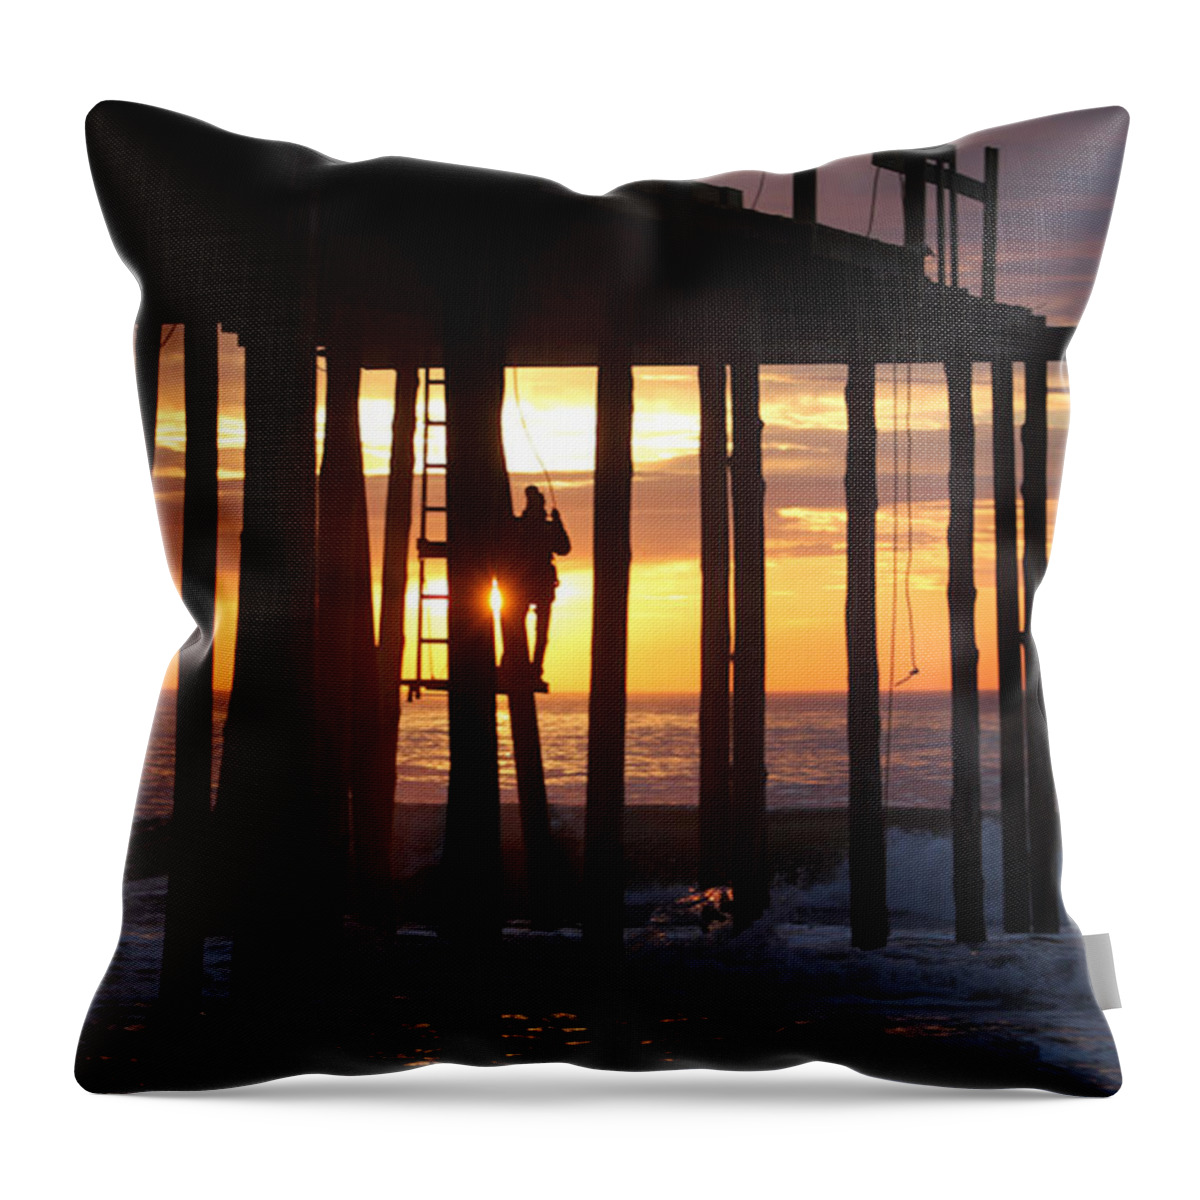 Work Throw Pillow featuring the photograph Working On The Pier At Dawn by Robert Banach